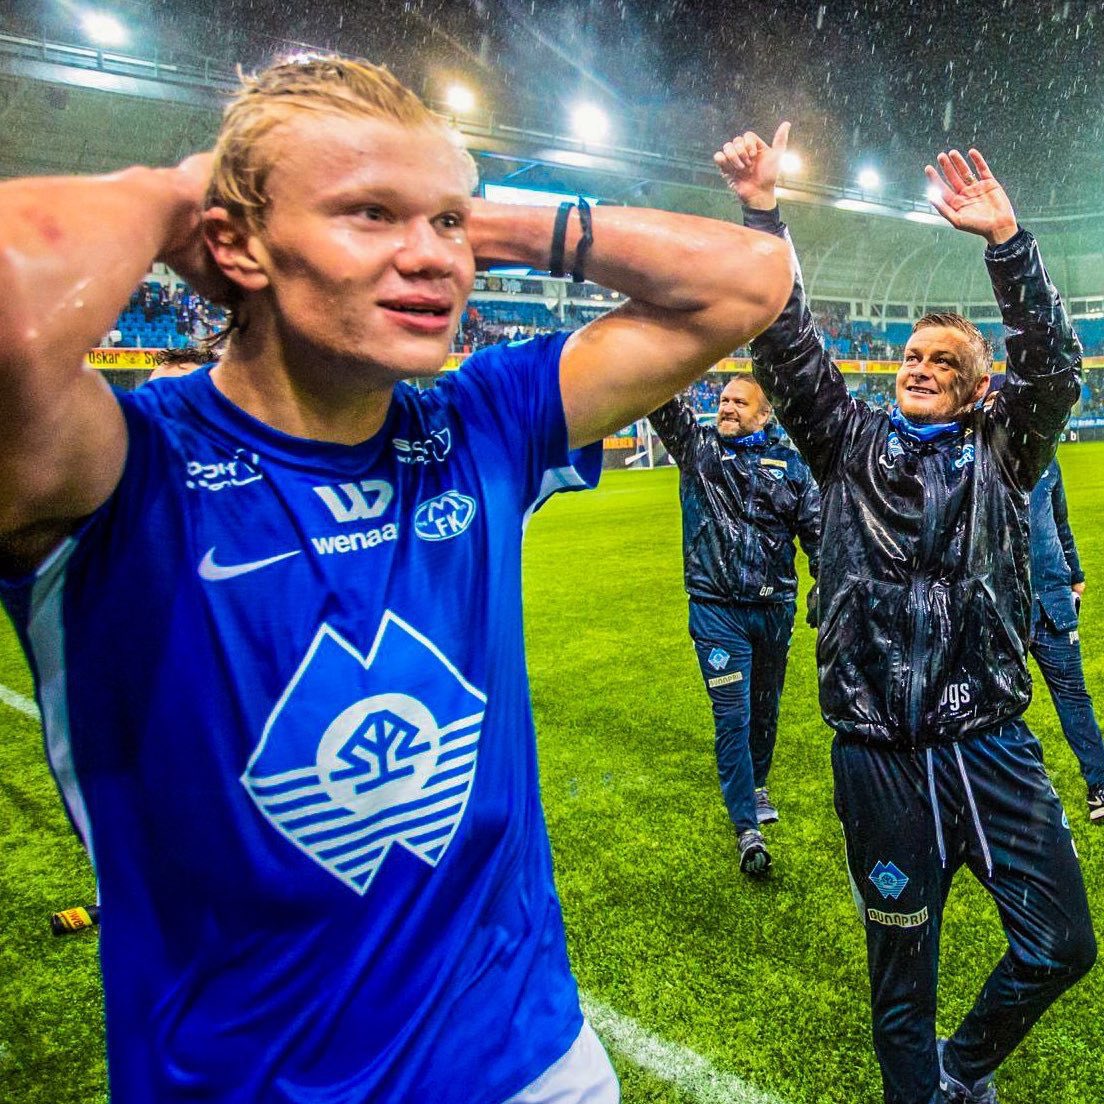 🔴🇳🇴 Solskjær: “The summer before I got to Man United I rang them and said: you’ve got to sign Erling Haaland. He will be top. Absolutely top class”. “That was June, July 2018… they said: nah, we’ve got enough reports”, told @WeAreTheOverlap.